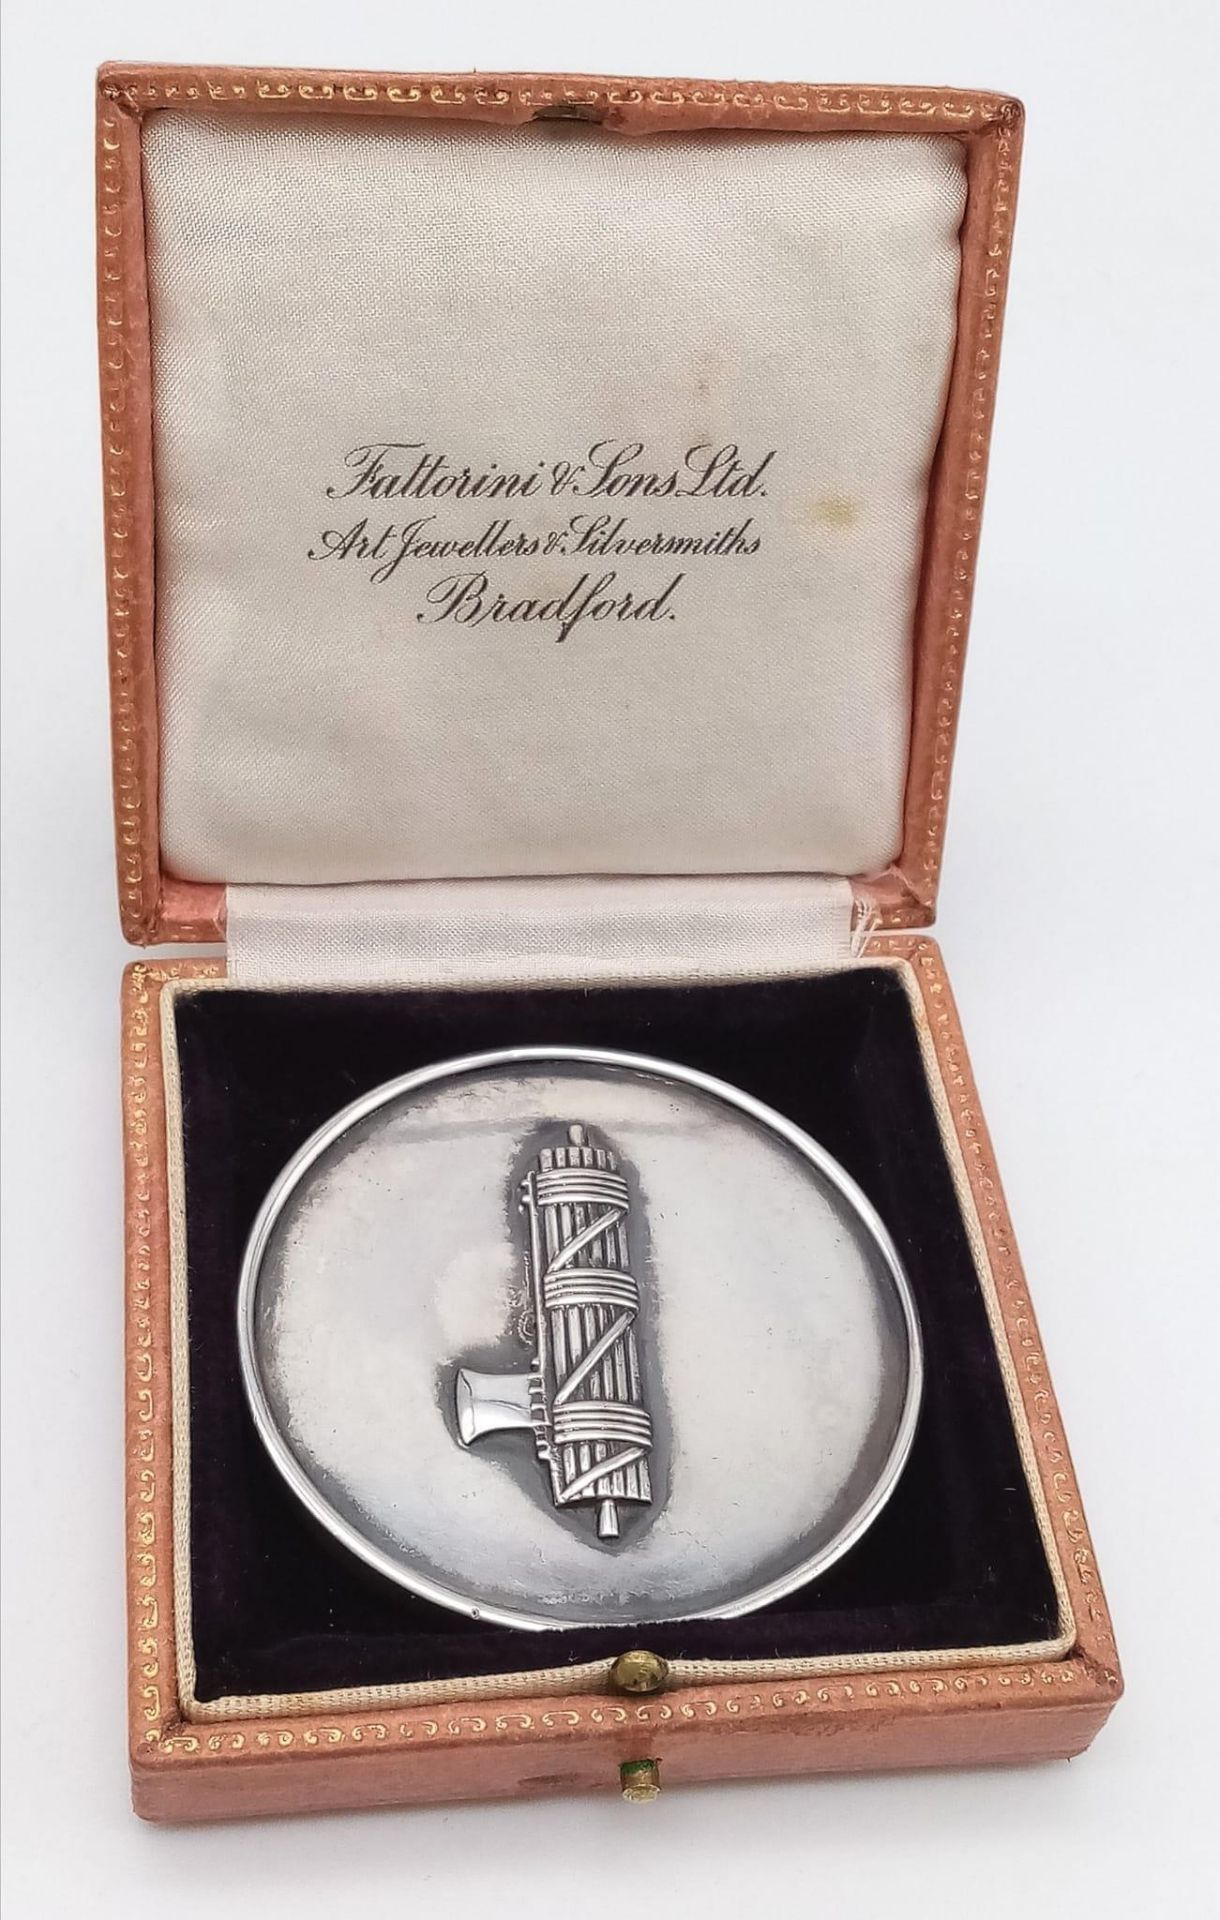 Very Rare British Union Fascists Silver Medallion that was presented to Sir Oswald Mosley by the - Image 6 of 7